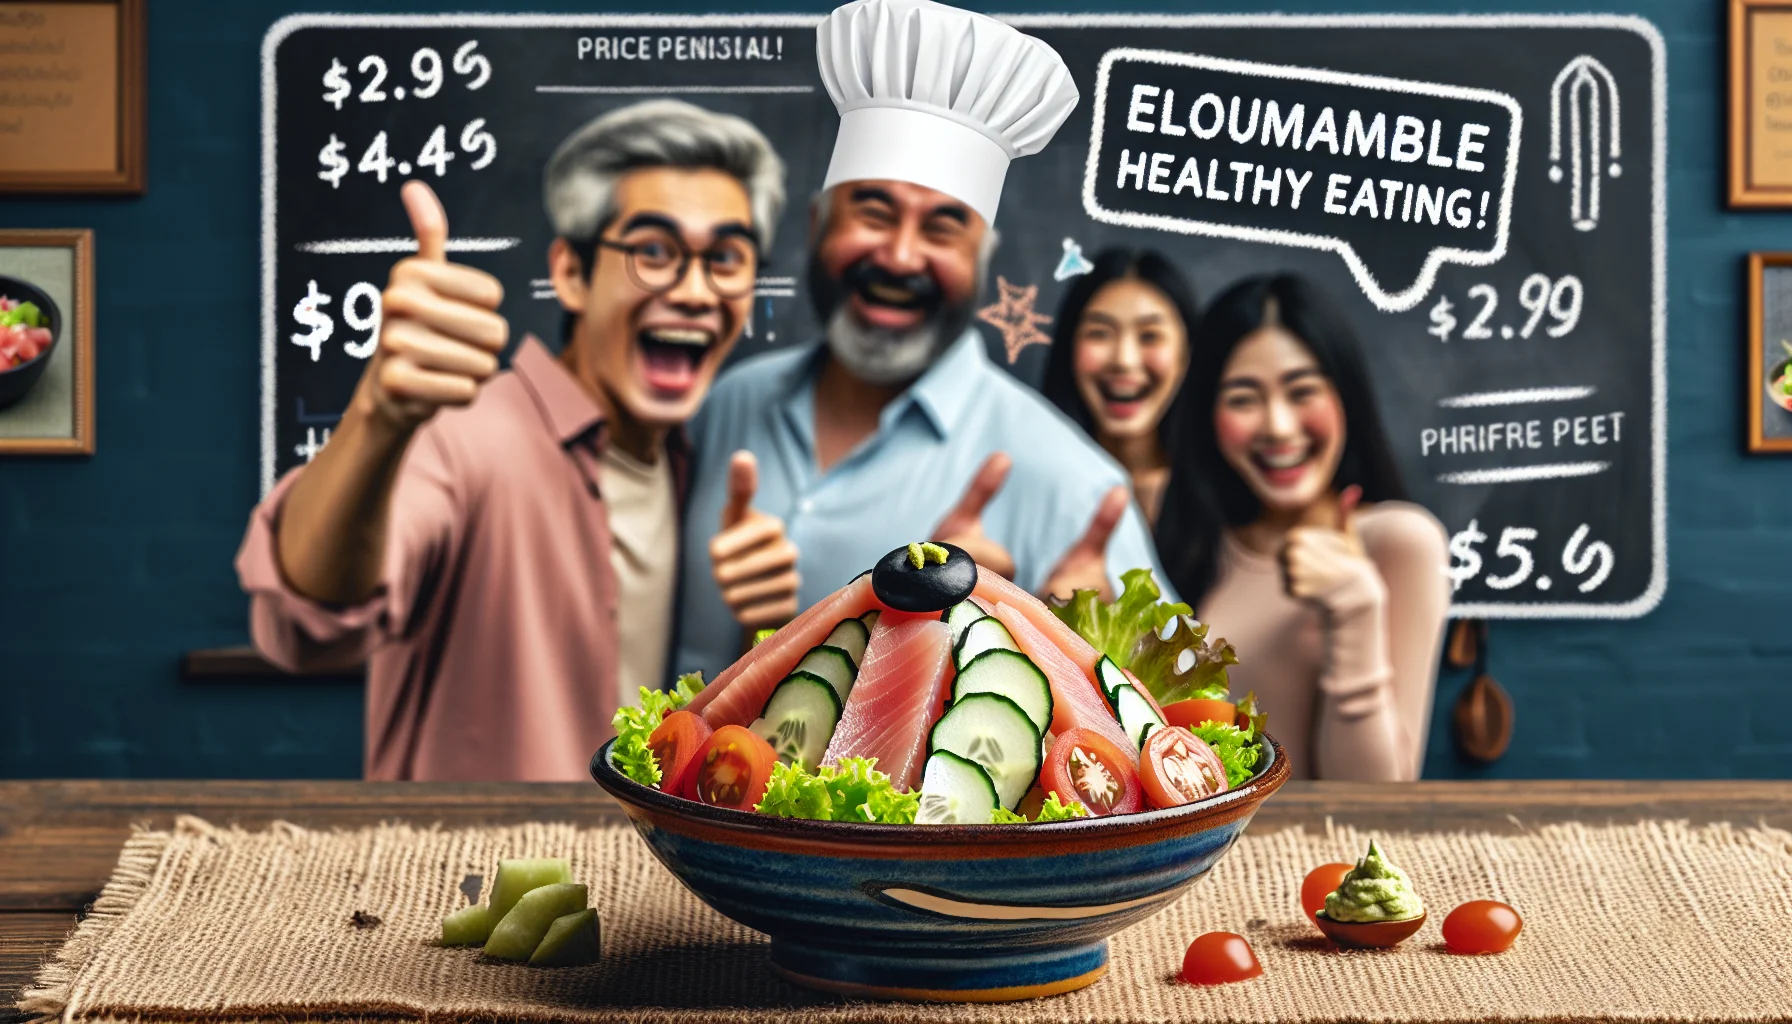 Create an amusing and enticing scenario exemplifying economical healthy eating. Picture a Japanese tuna salad on a traditional ceramic plate, presented by a Middle-Eastern man with a whimsical chef hat, and a South Asian woman giving a thumbs up. The background includes a price tag showing an affordable price and a chalkboard with fun facts about the benefits of eating tuna salad. The colors are vibrant, enhancing the appeal of fresh ingredients like sliced tuna, crisp lettuce, sliced cucumbers, cherry tomatoes, and a drizzle of wasabi dressing. Blurred yet joyful faces are in the background benefiting from such delightful feast.